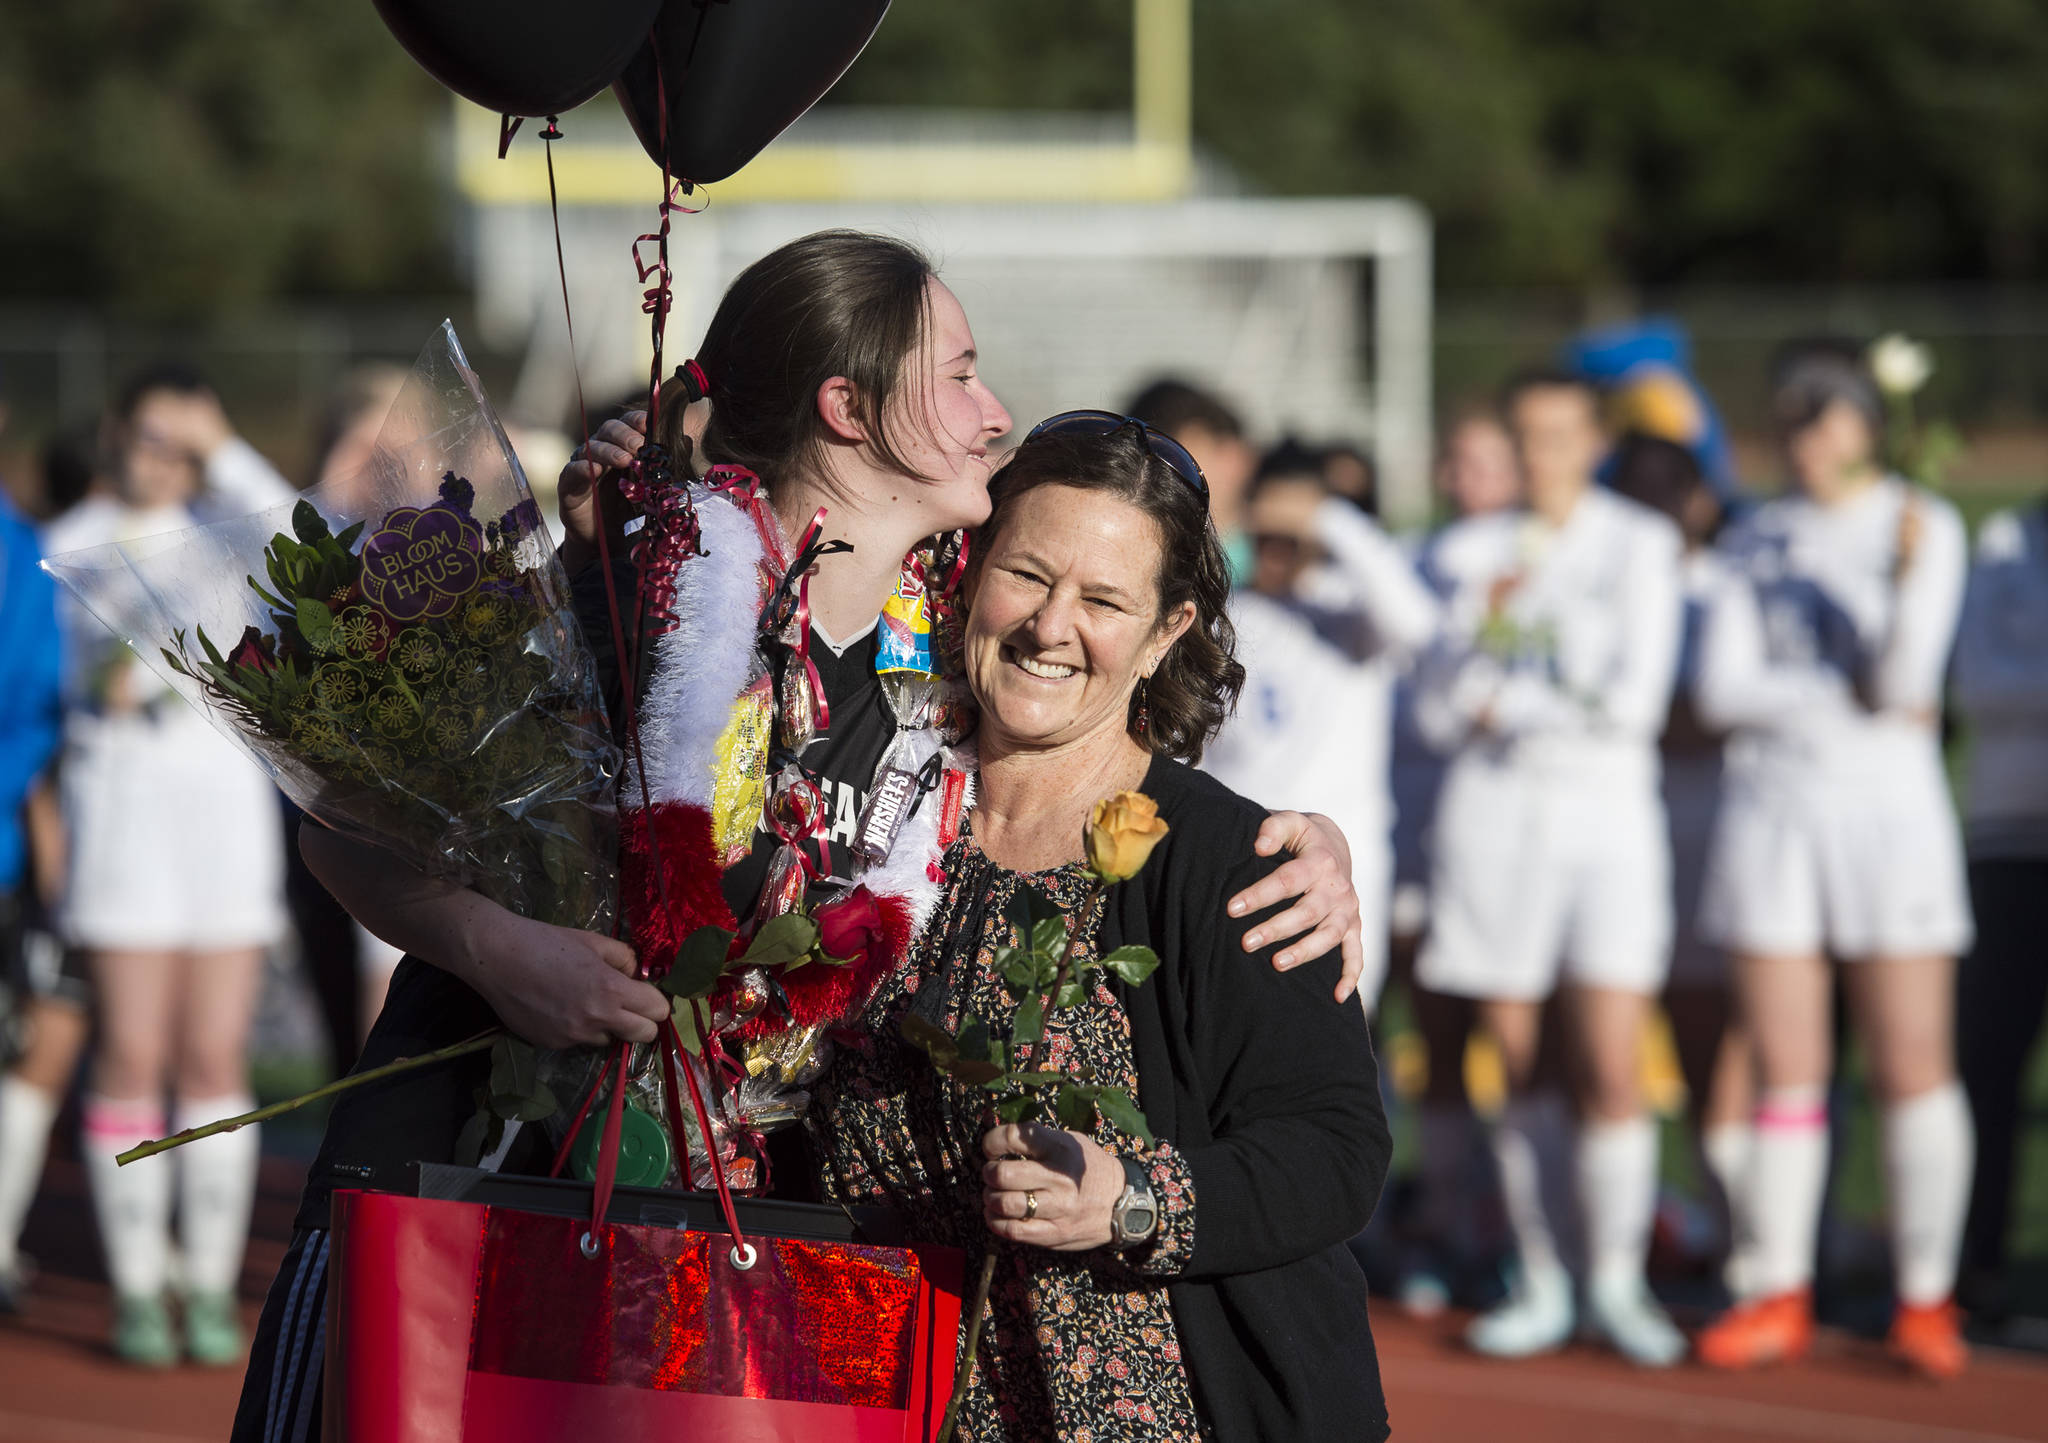 Juneau-Douglas’ Bianca Eagan receives gifts from her mother, Cynthia, for Senior Night at Adair-Kennedy Memorial Park on Tuesday, May 15, 2018. (Michael Penn | Juneau Empire)